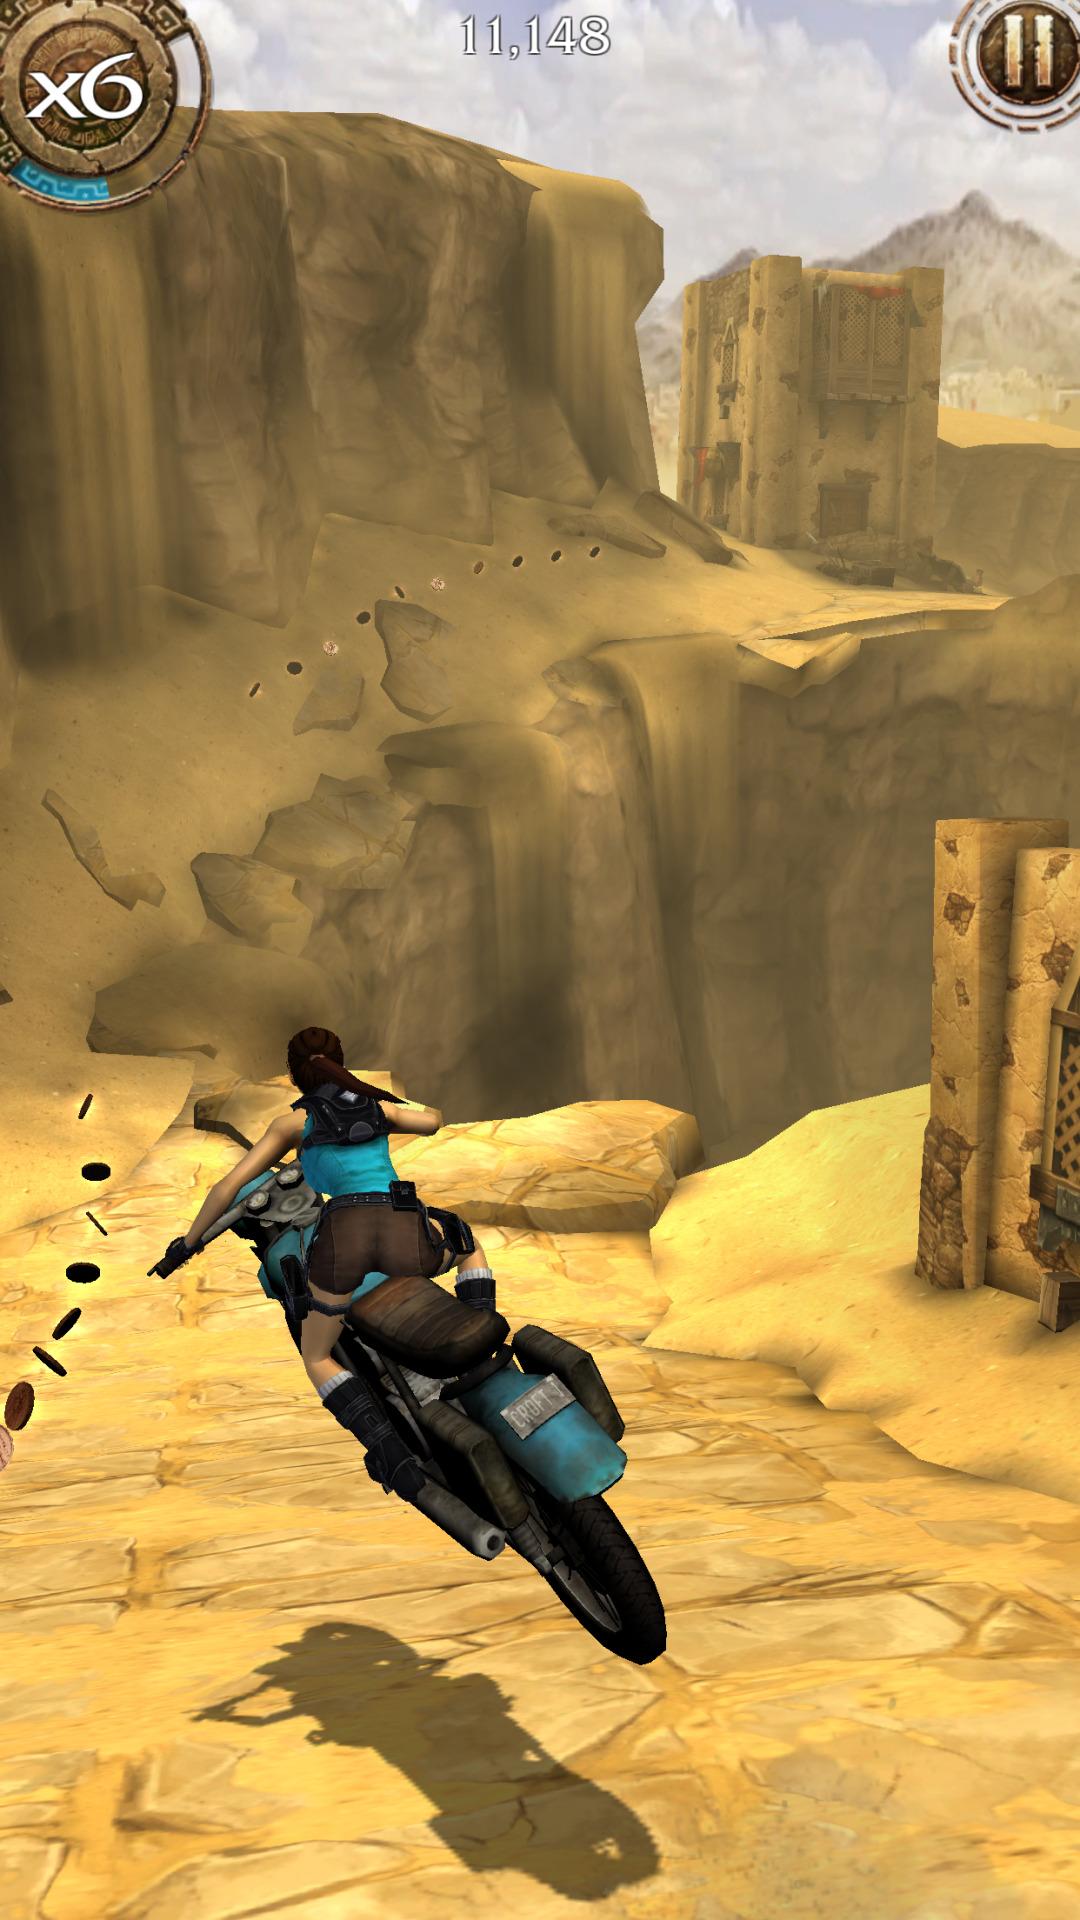 Lara Croft's Relic Run is Coming to iOS, Android and Windows